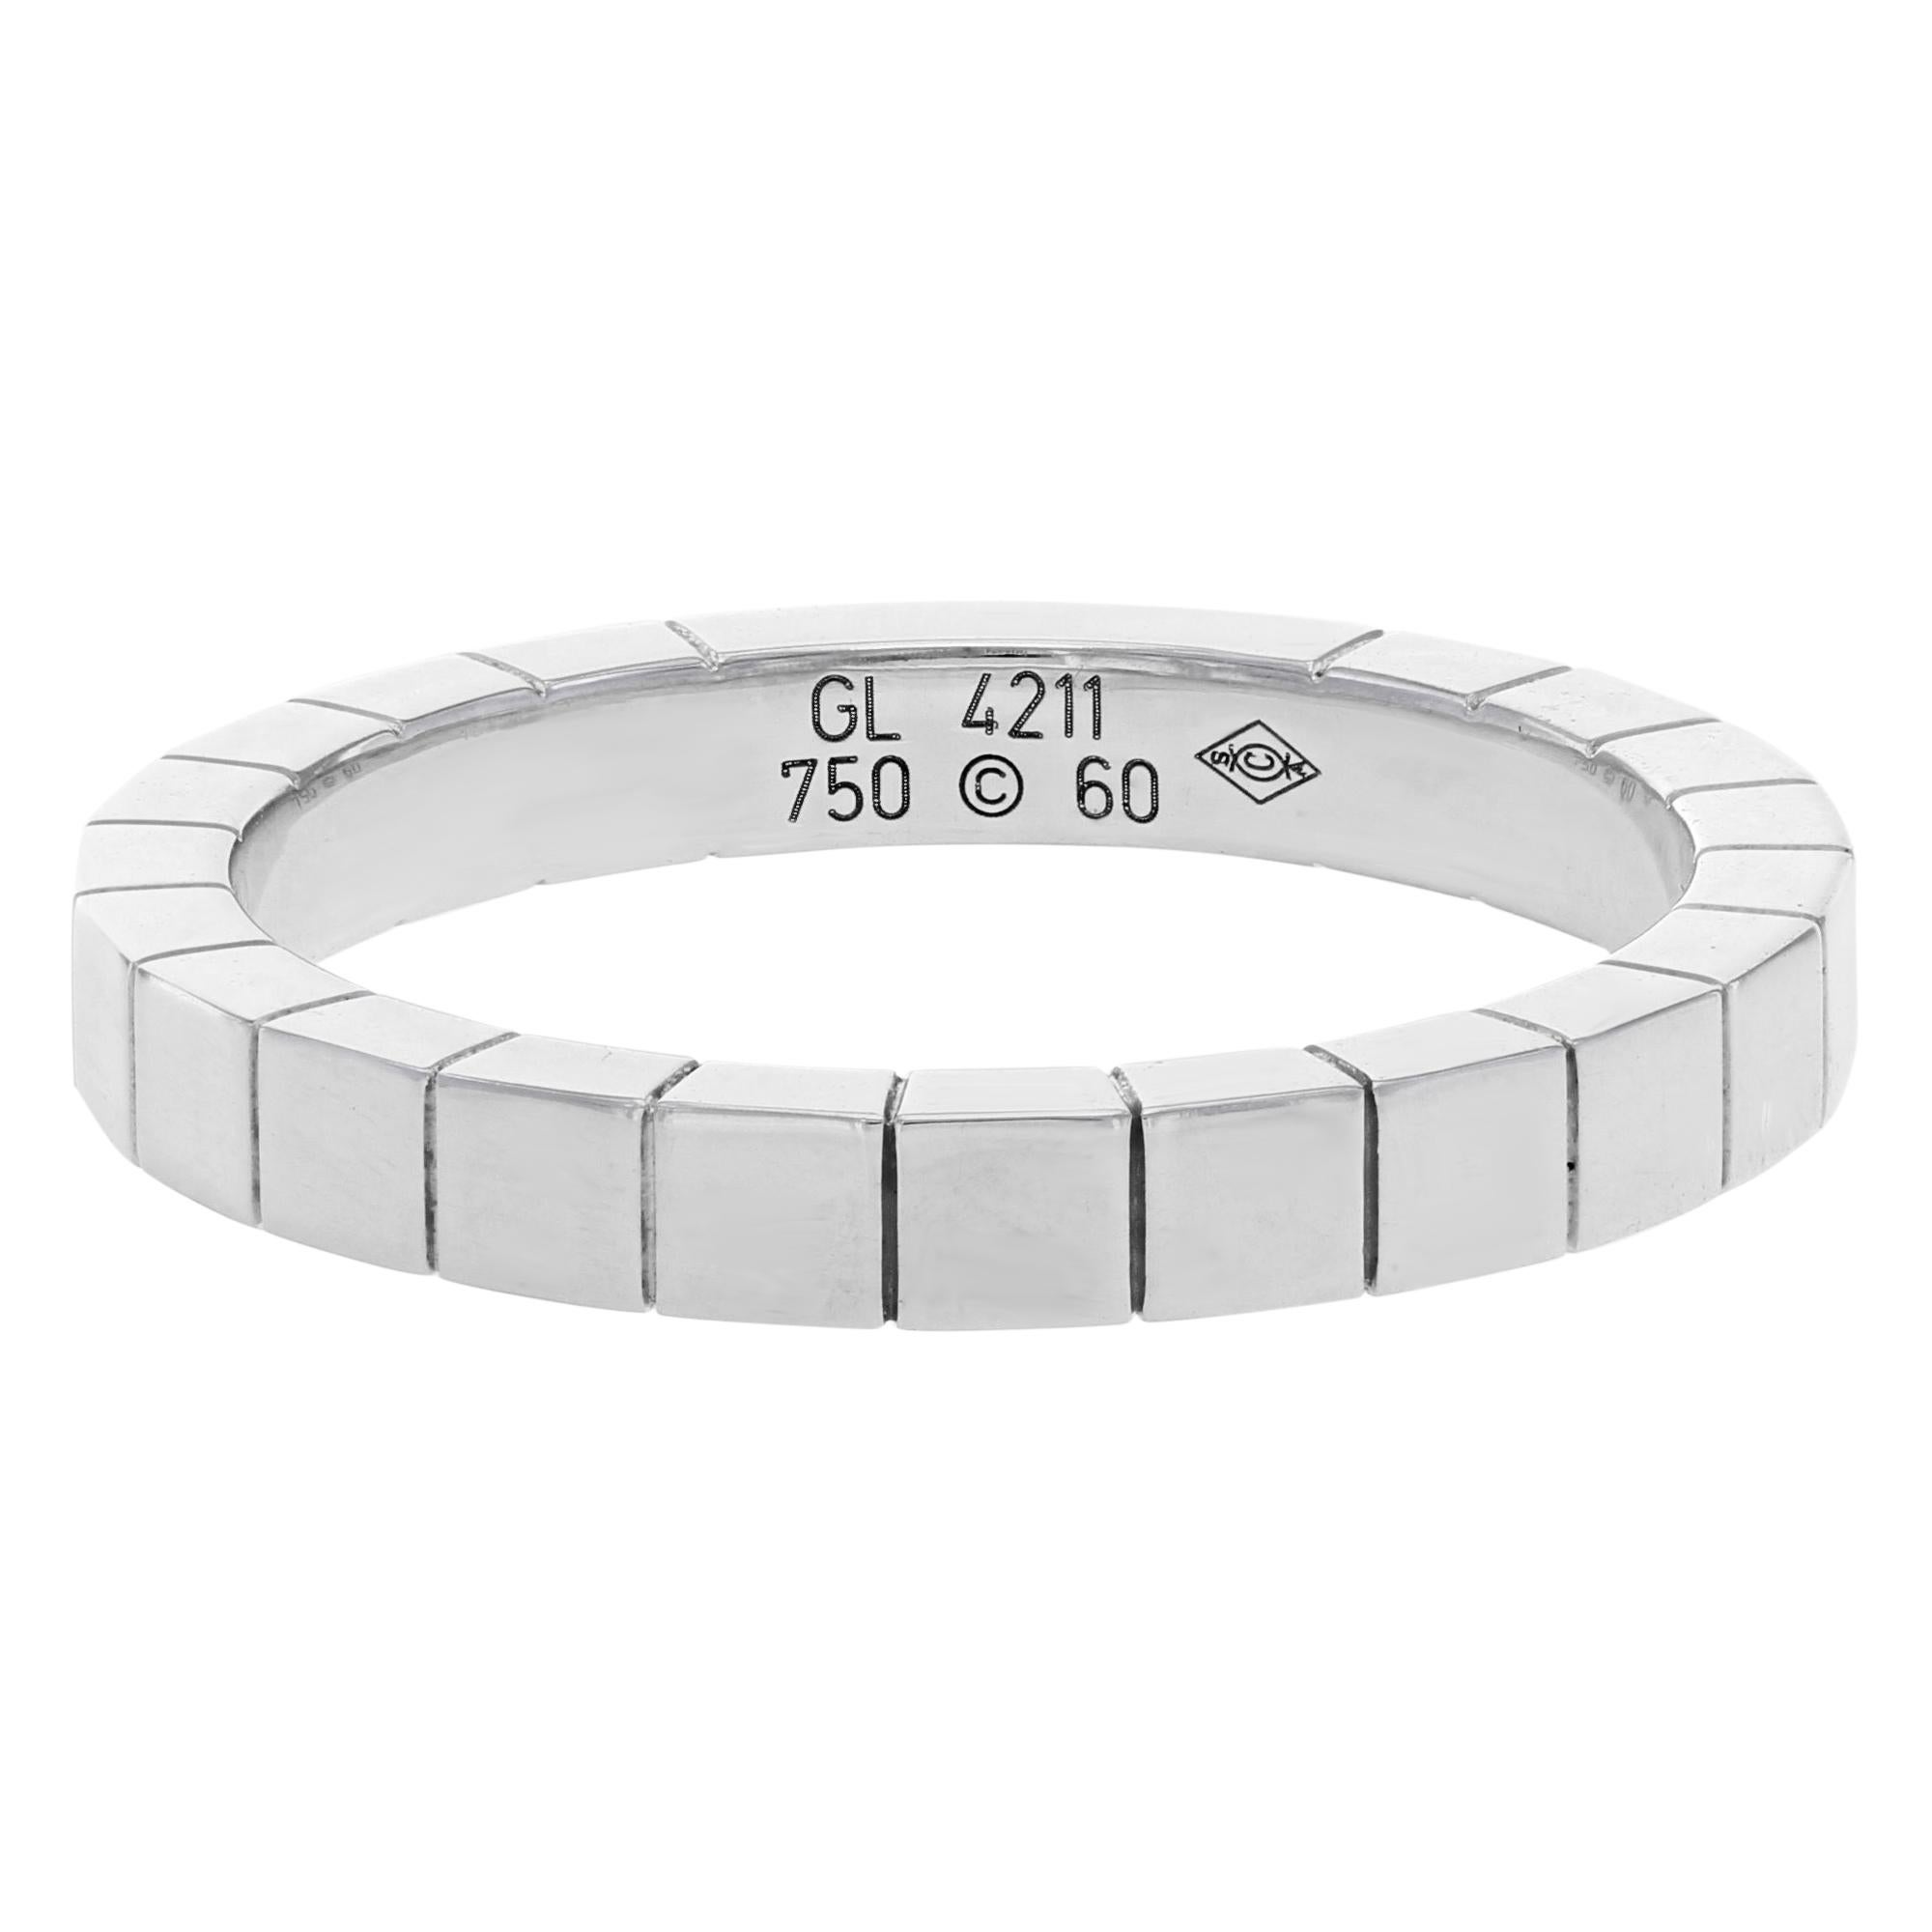 Aauthentic Cartier Lanieres B4045060 18K White Gold Unisex Wedding Band is pre-owned in excellent condition -- it will be polished before shipping and will look flawless. It's made of 18K white gold, size of the ring is 9.5 and total weight 7 g. The